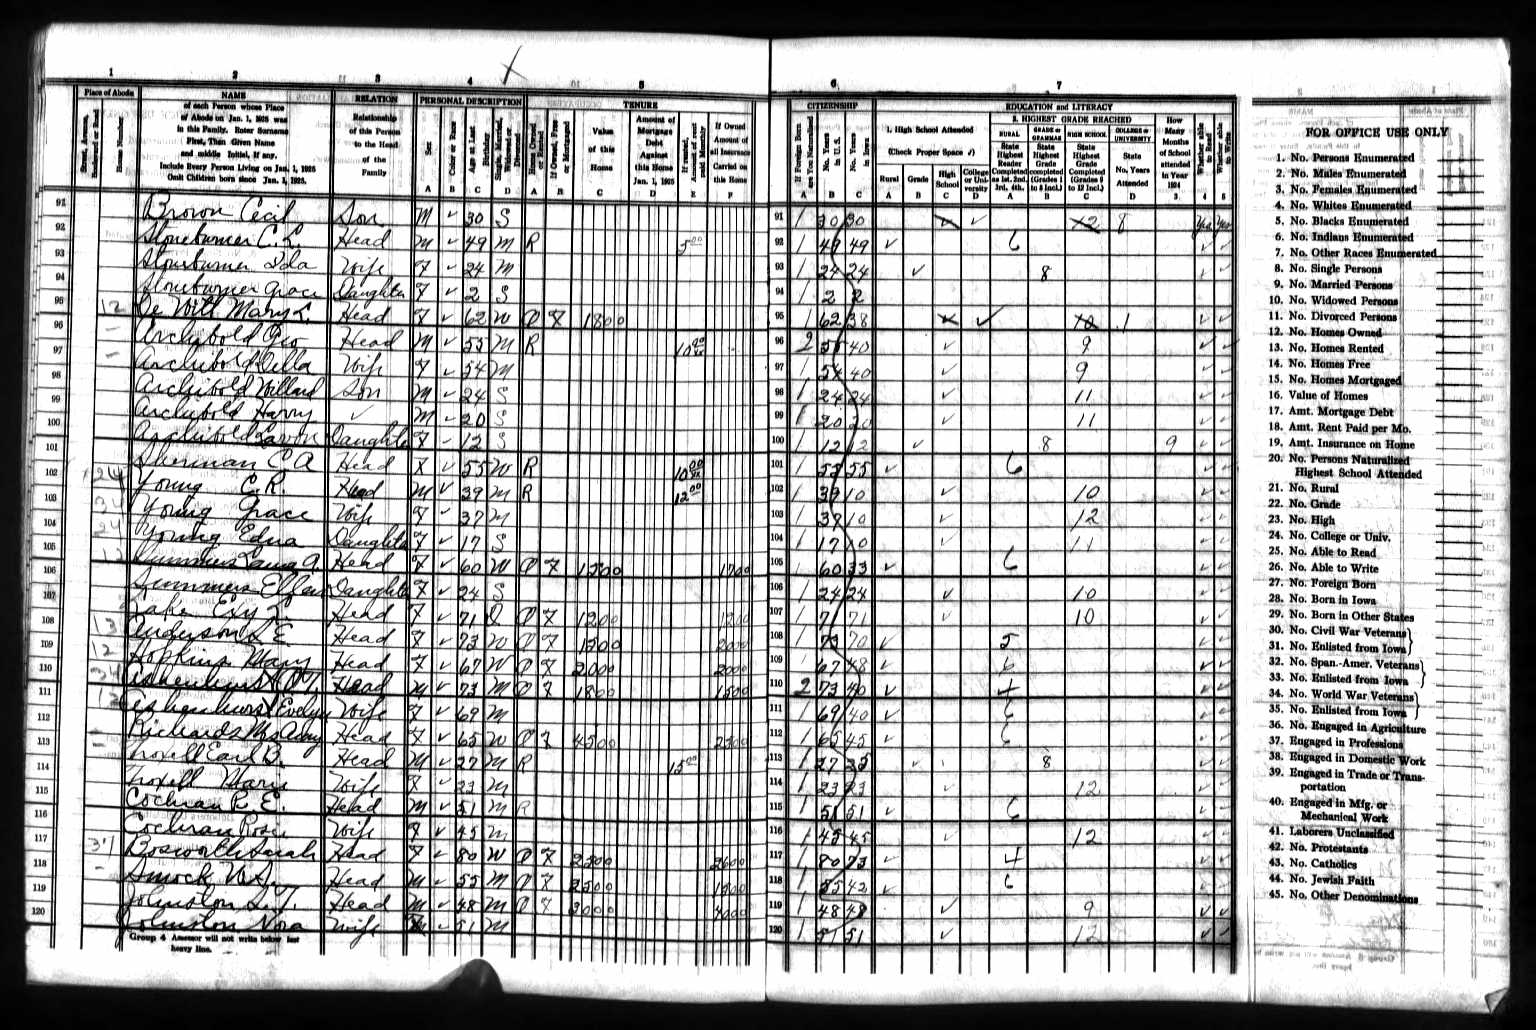 Mary (Walker) Hopkins, 1925 Iowa State census, Ringgold County; daughter of Philip V. Walker and Frances Best